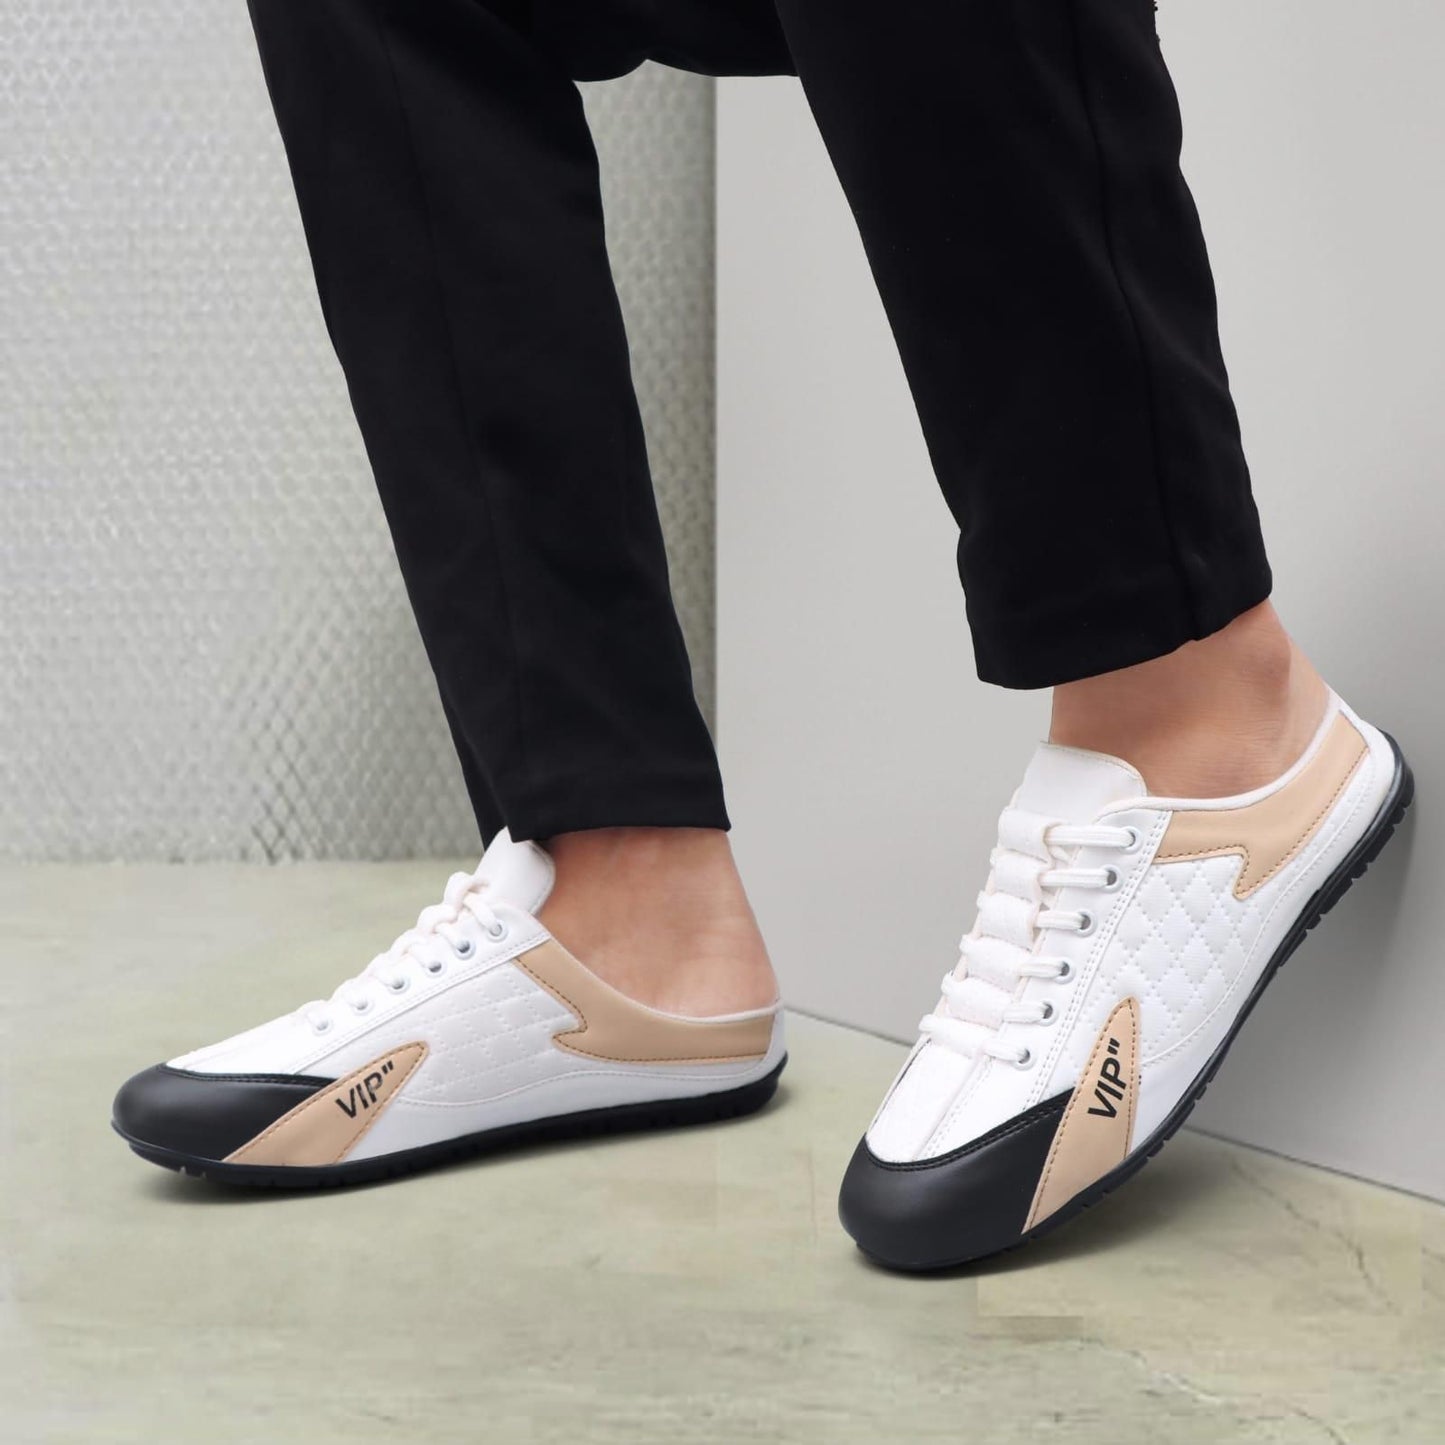 Men's Perfect Fusion of Loafer & Half Drag Sneaker